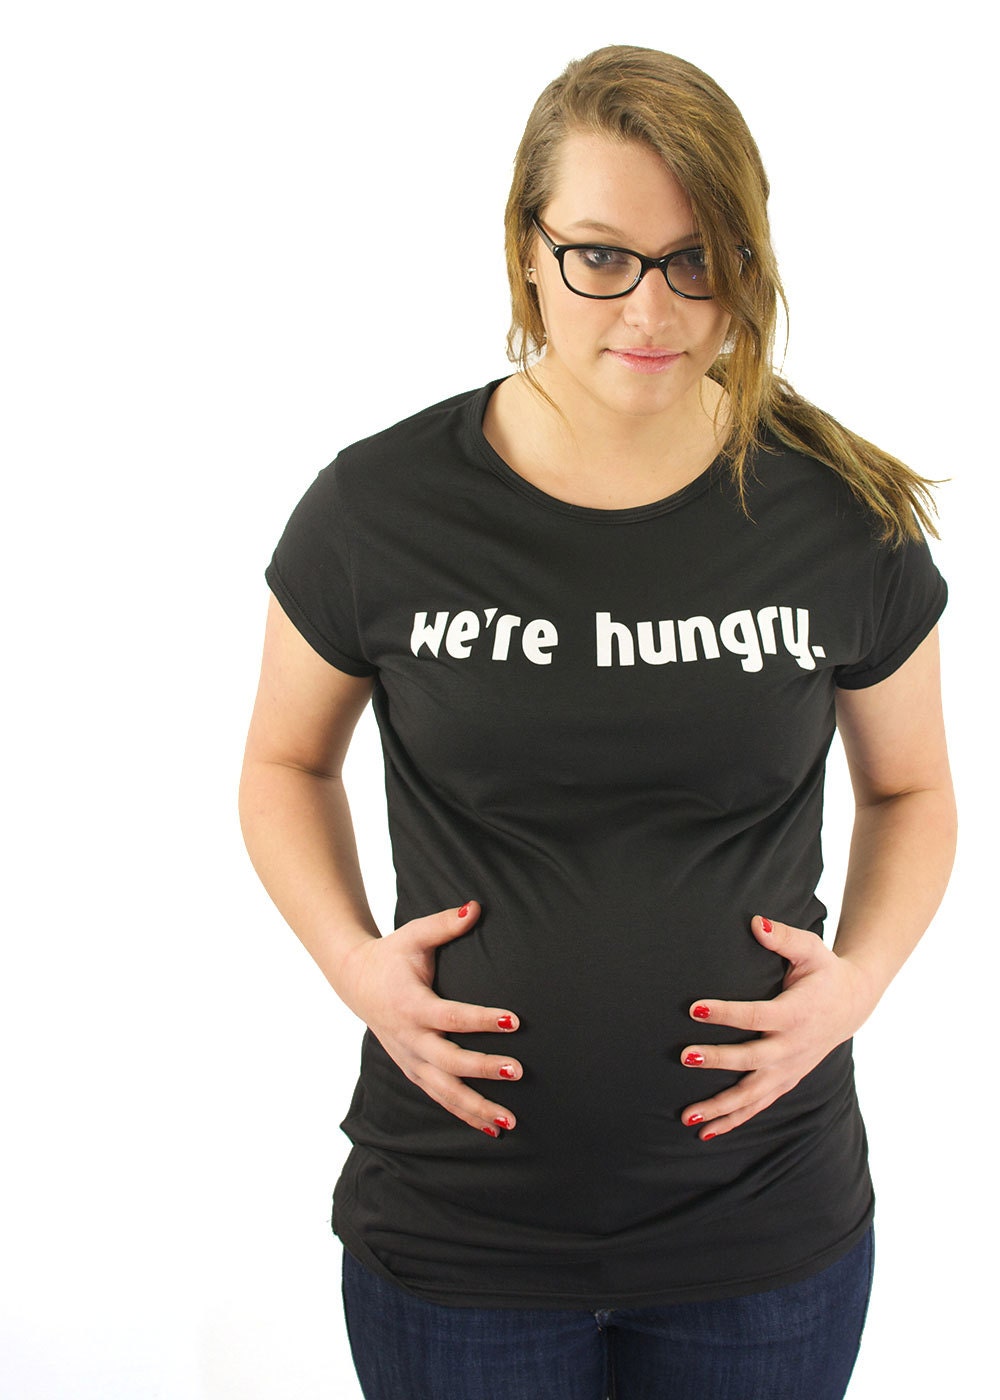 SUPER Soft & Stretchy Made From Bamboo I'm hungry me too funny Maternity T-Shirt Clothes Top Clothing